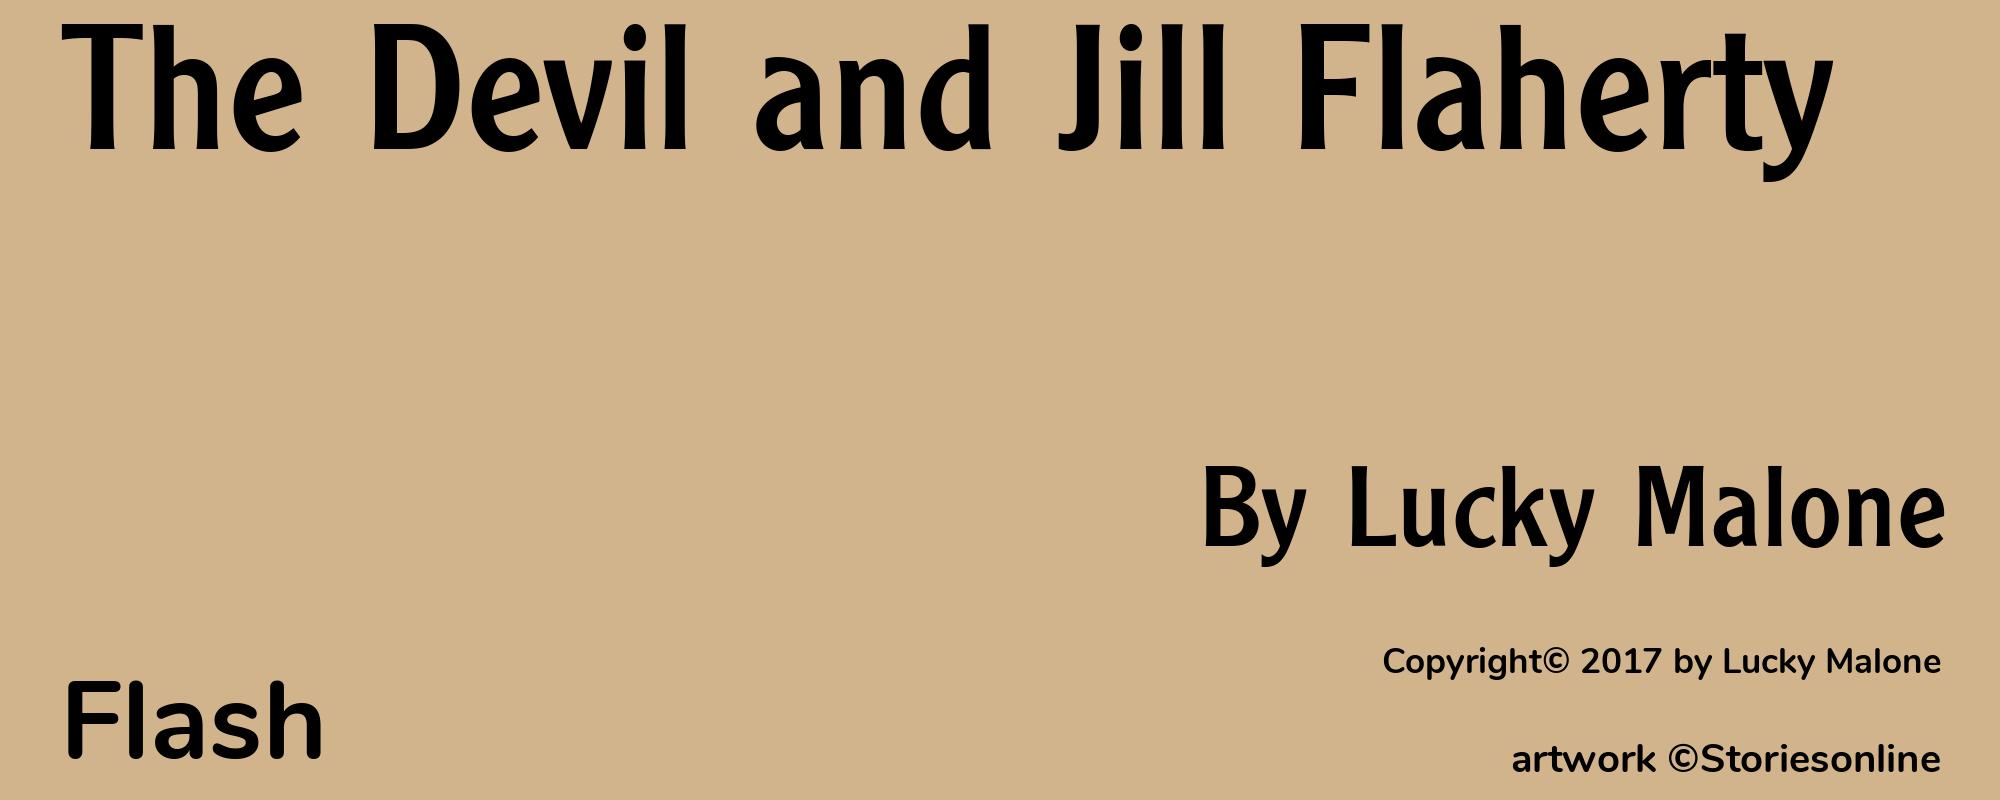 The Devil and Jill Flaherty - Cover